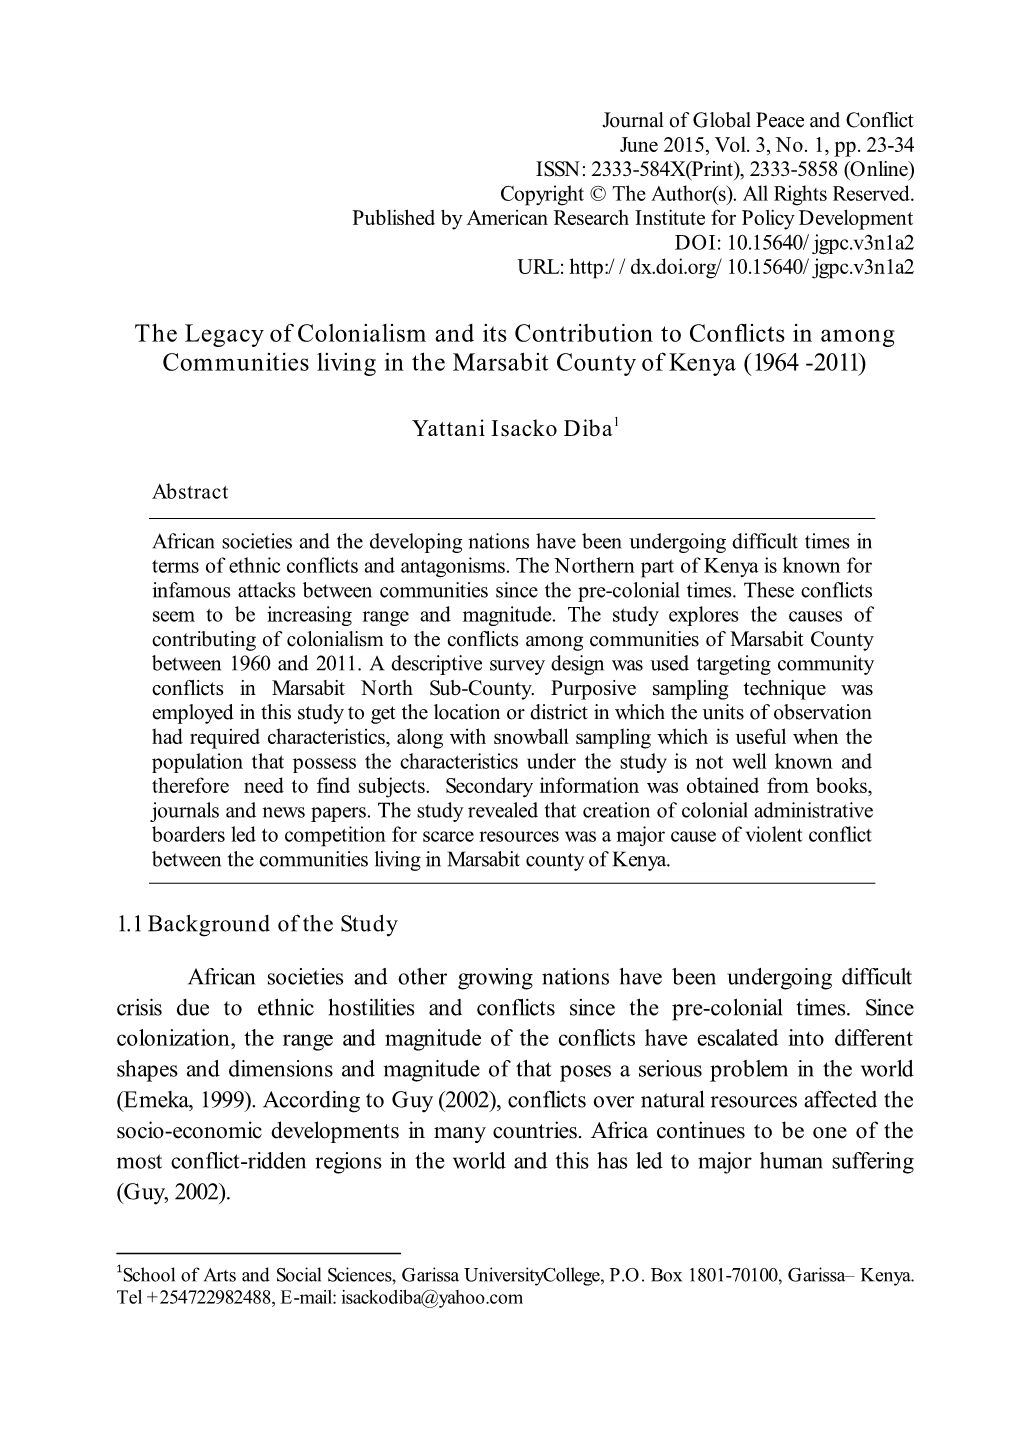 The Legacy of Colonialism and Its Contribution to Conflicts in Among Communities Living in the Marsabit County of Kenya (1964 -2011)